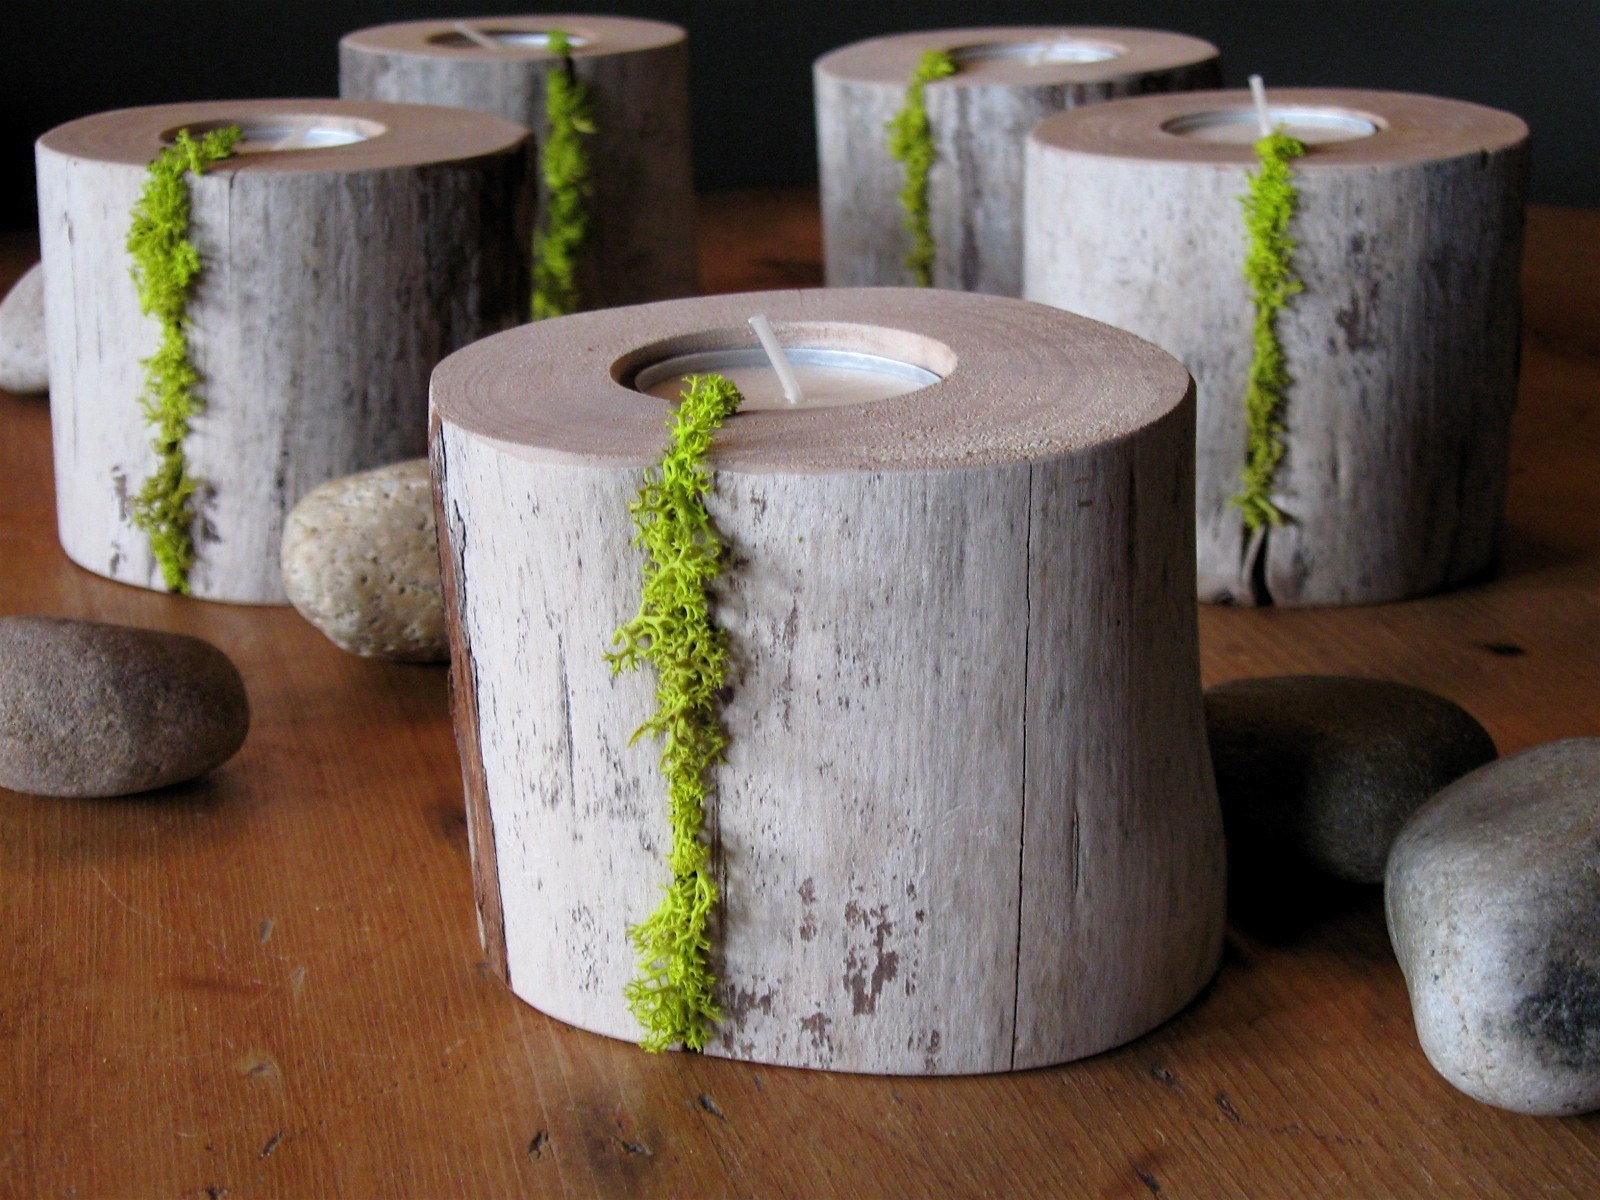 Set of 5 Driftwood and MOSS Candle holders for that organic home atmosphere. Give as gifts